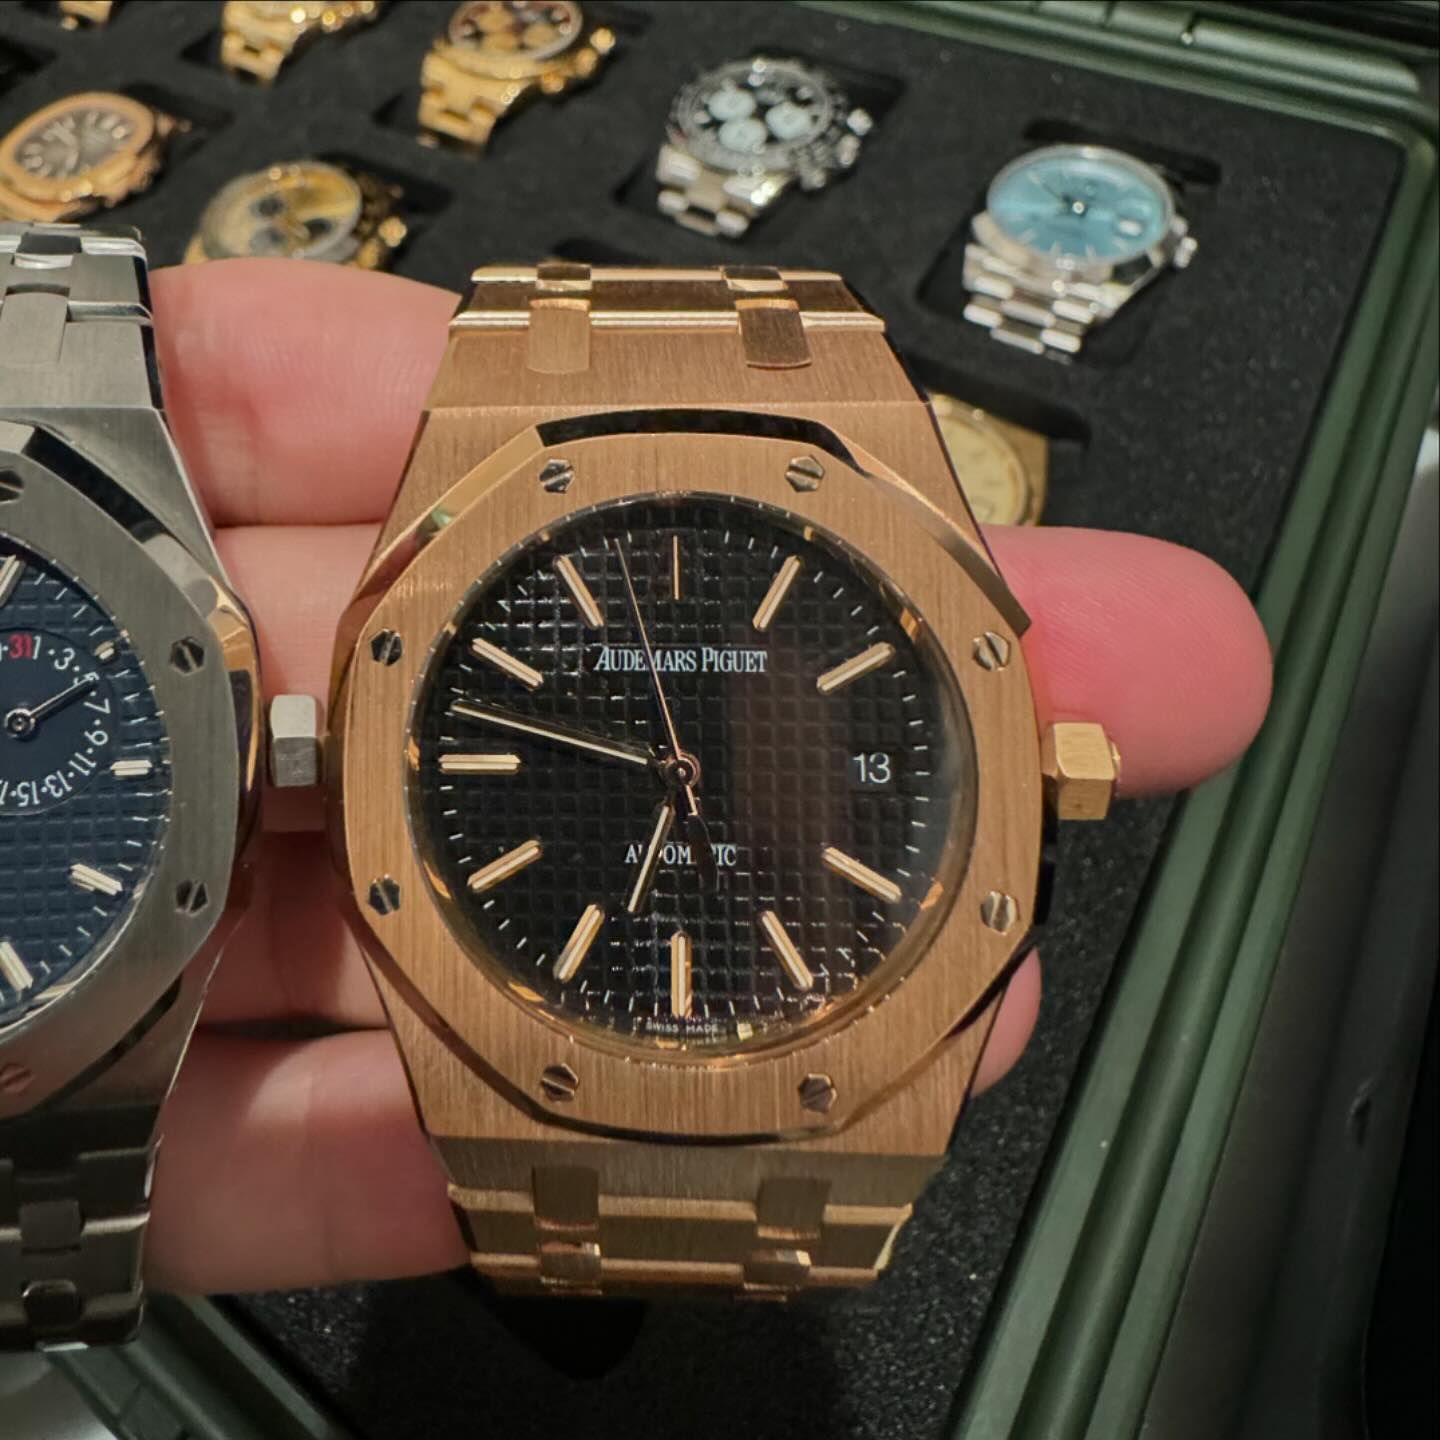 One photo featured an up-close look at the Audemars Piguet Royal Oak watch, worth close to 100,000